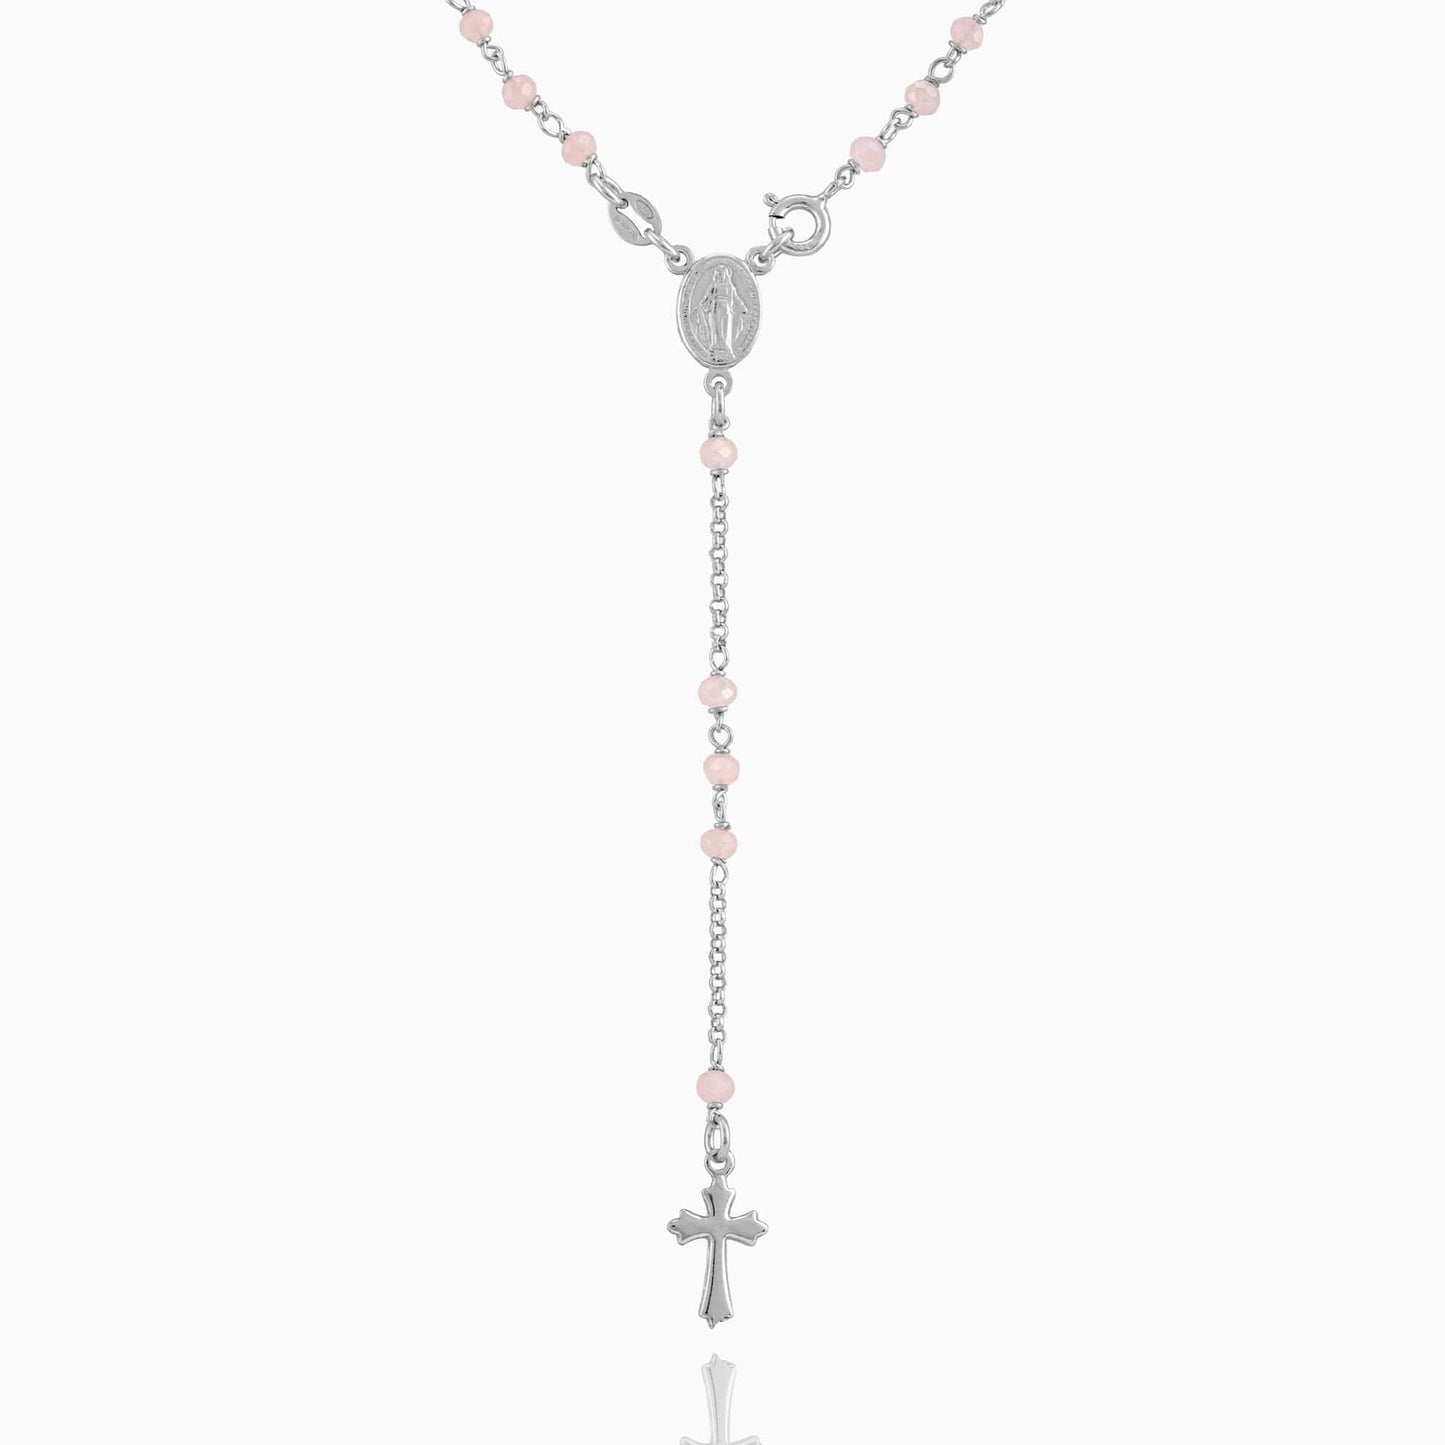 MONDO CATTOLICO Prayer Beads Rhodium / Cm 50 (19.7 in) Miraculous Mary Rosary Pink Beads in Sterling Silver